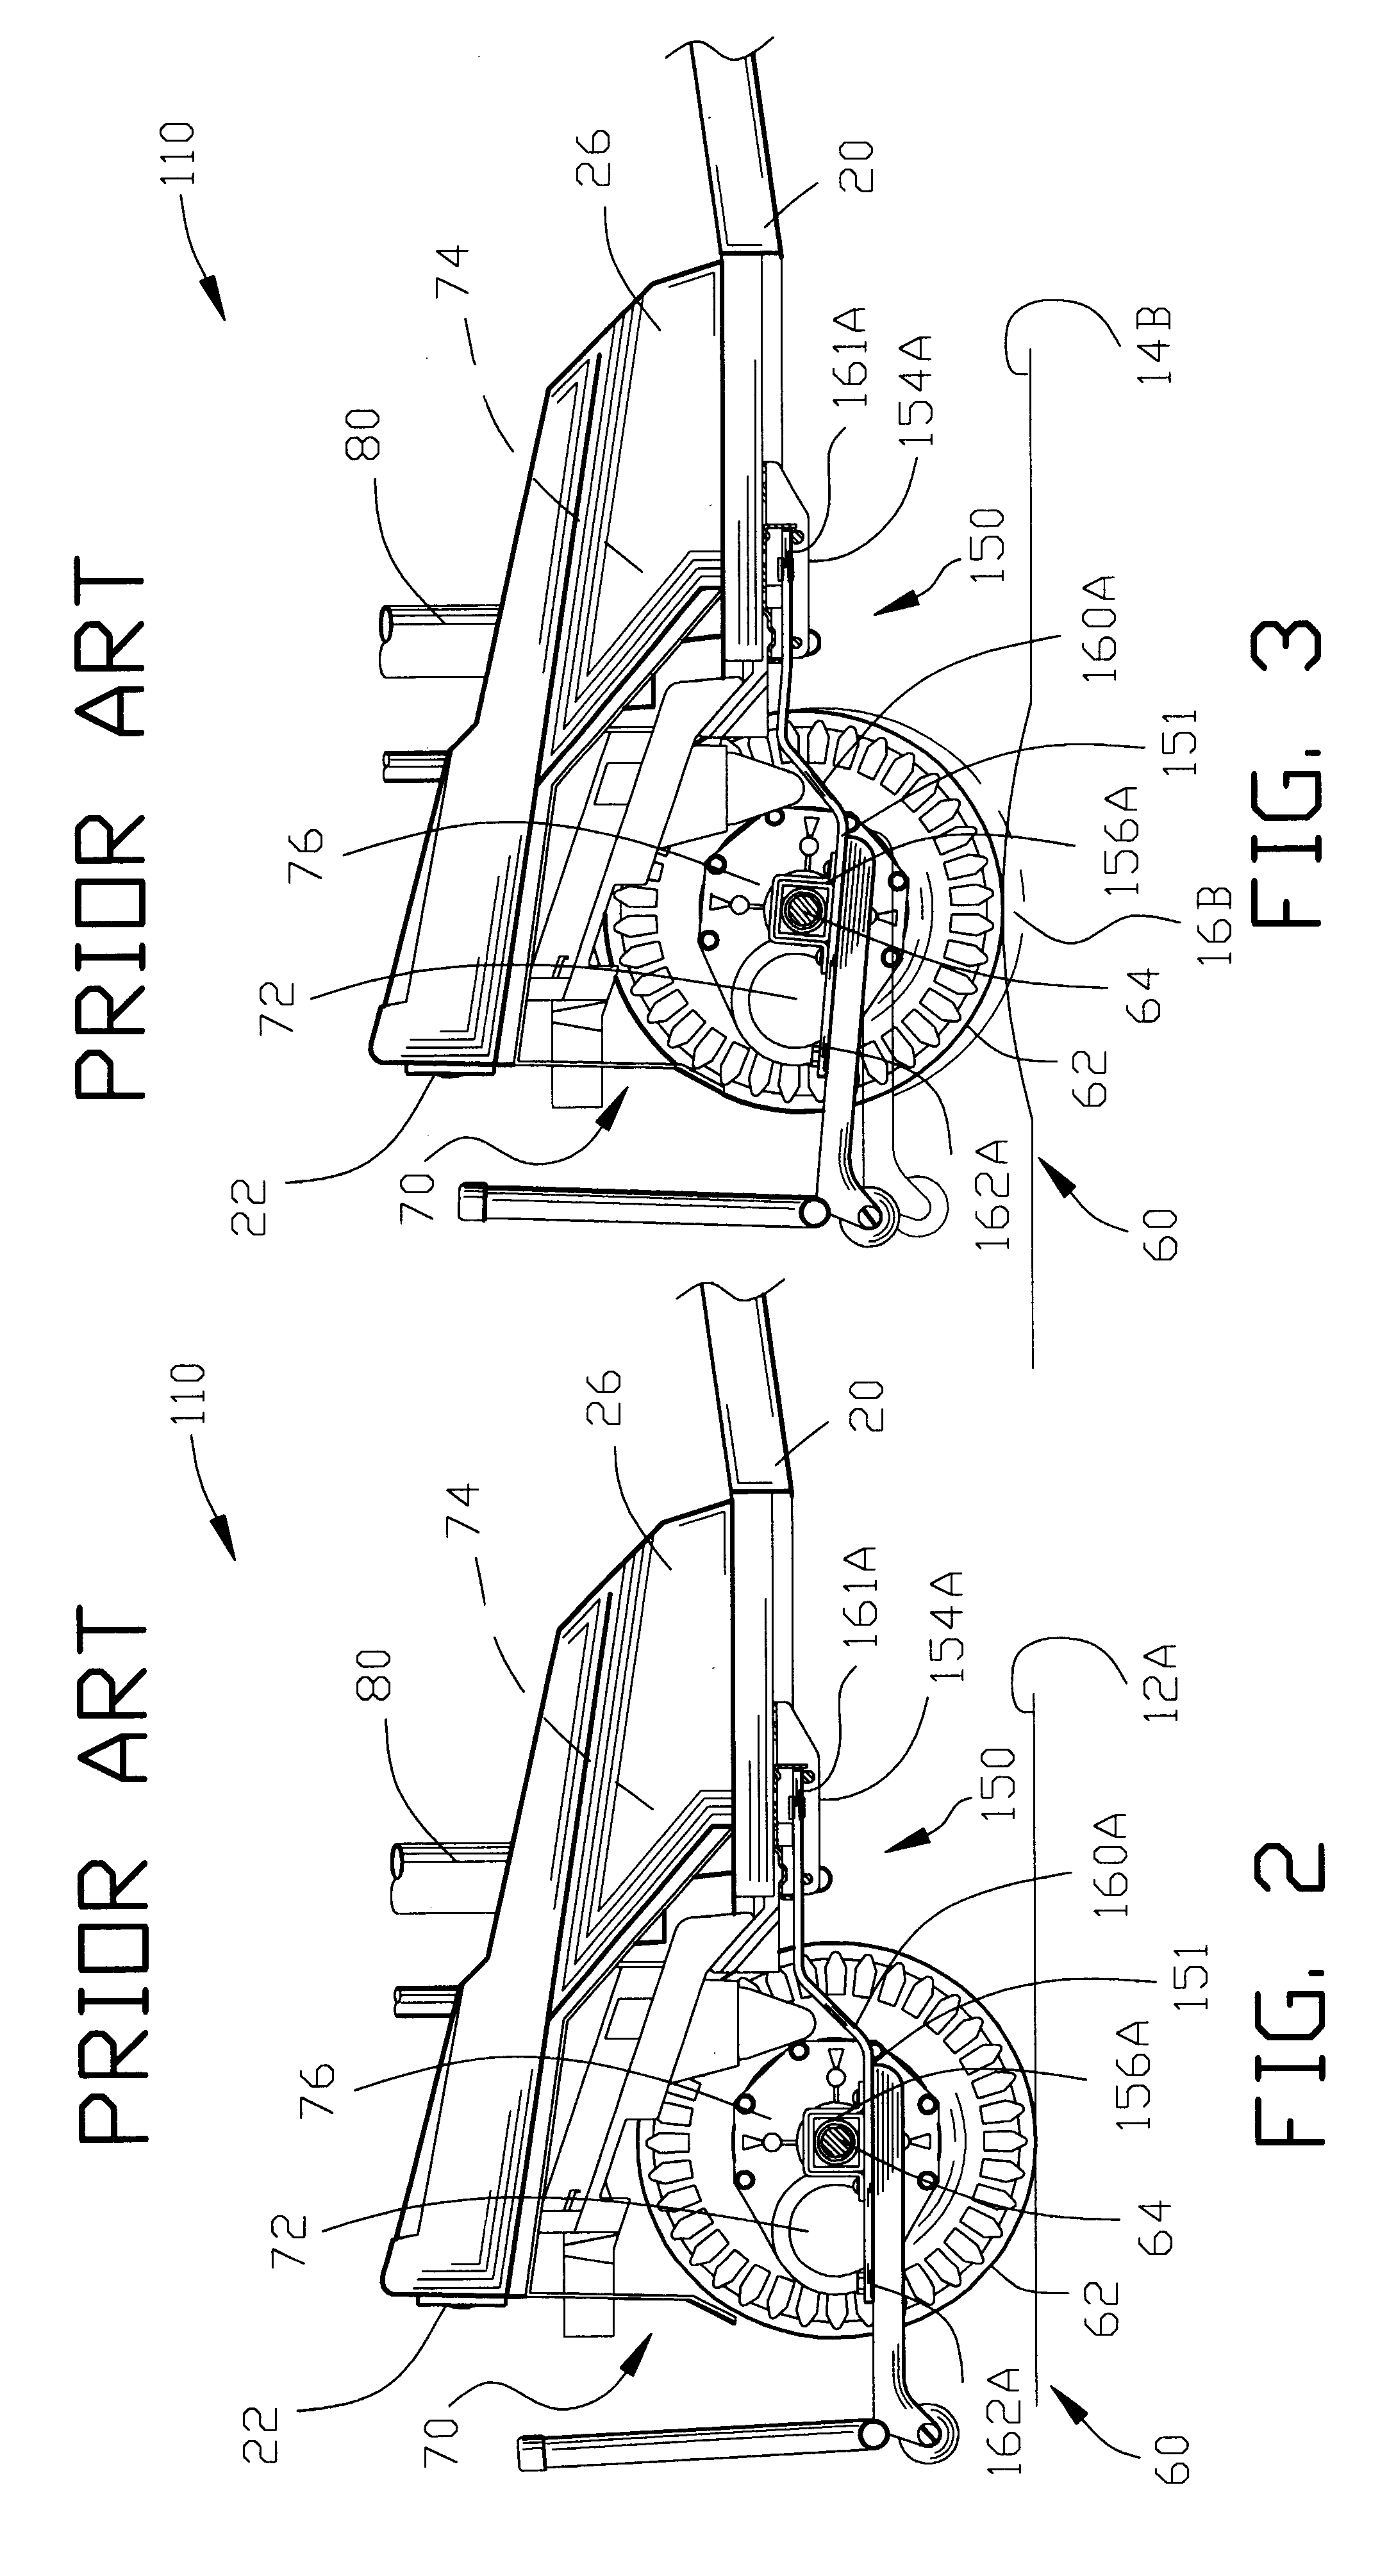 Suspension for personal mobility vehicle